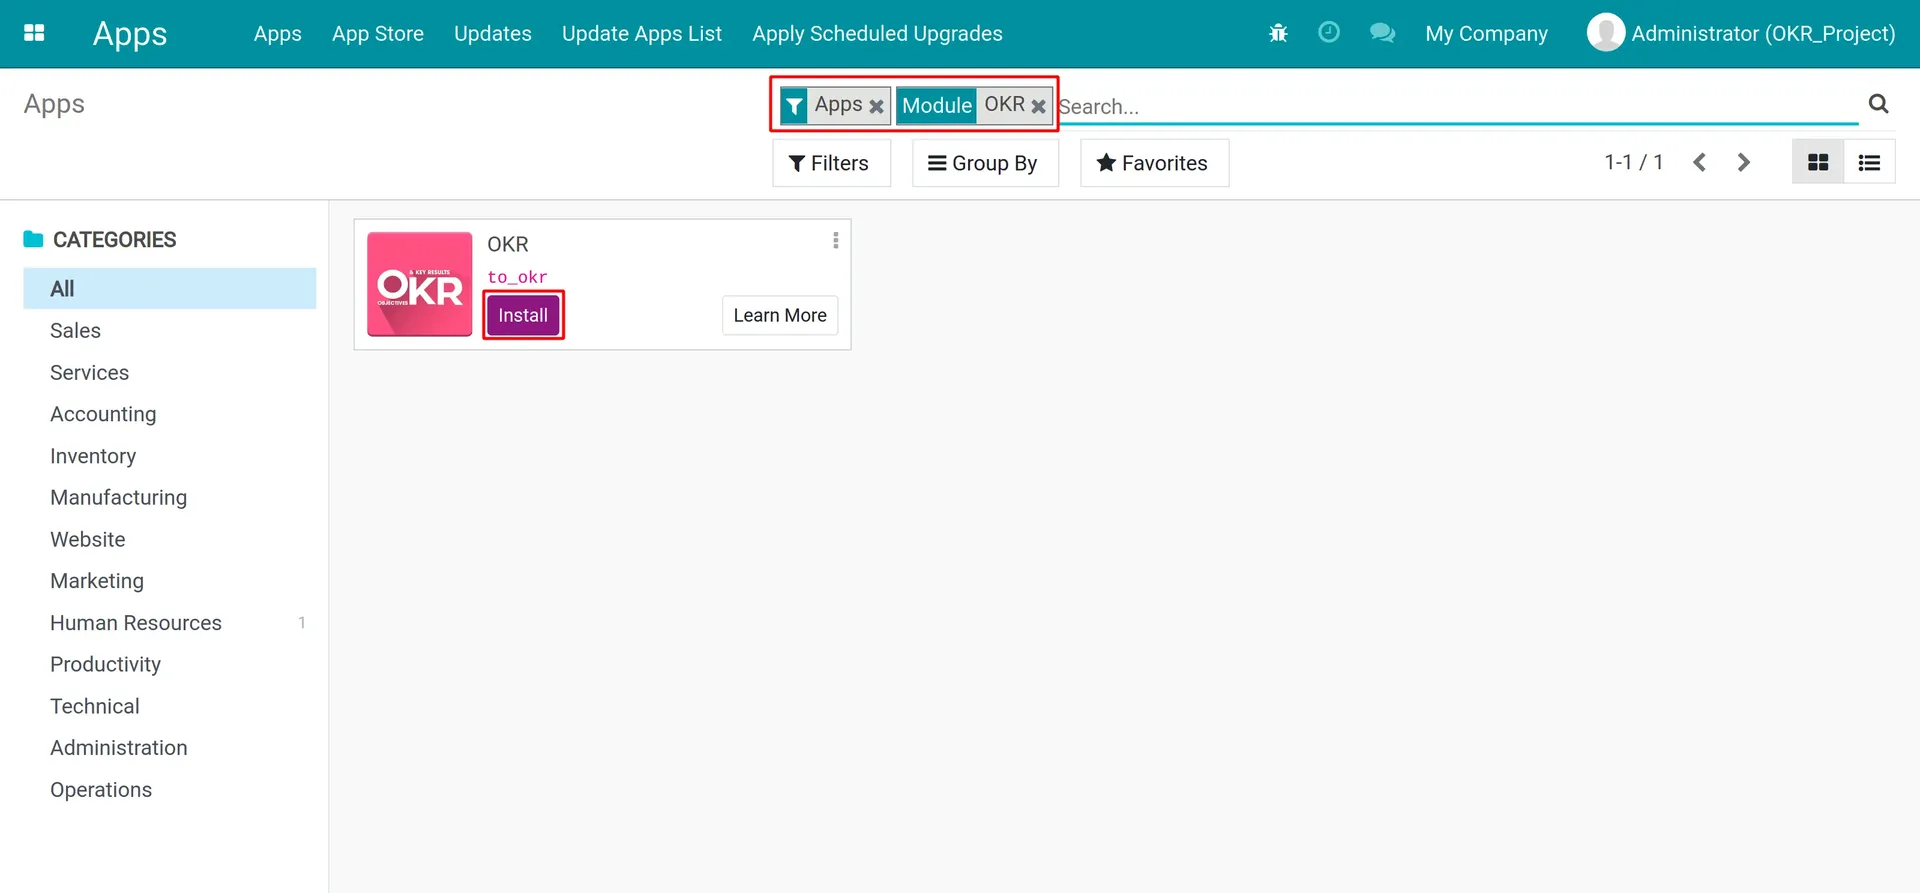 Introduction to Odoo/ERPOnline OKR 14.0   